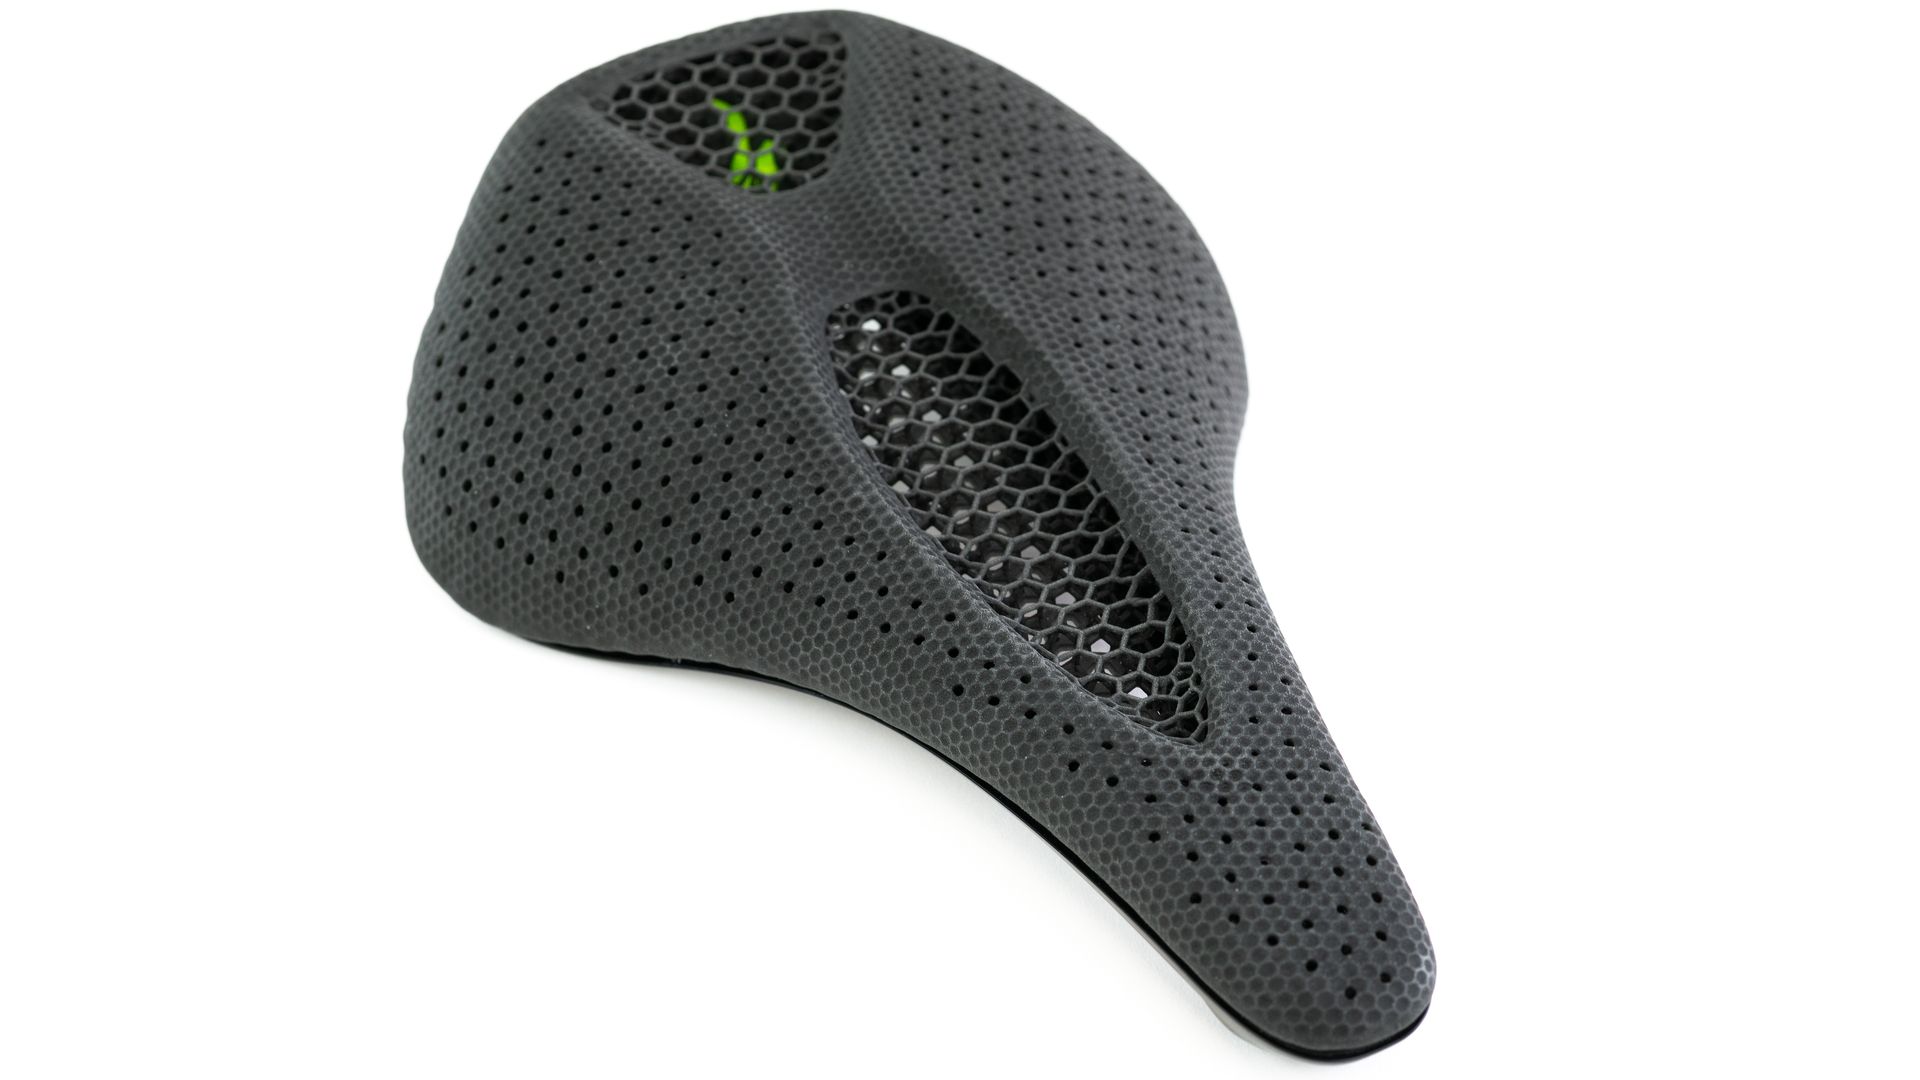 Specialized worked with 3D printing firm Carbon to create this customized bike seat